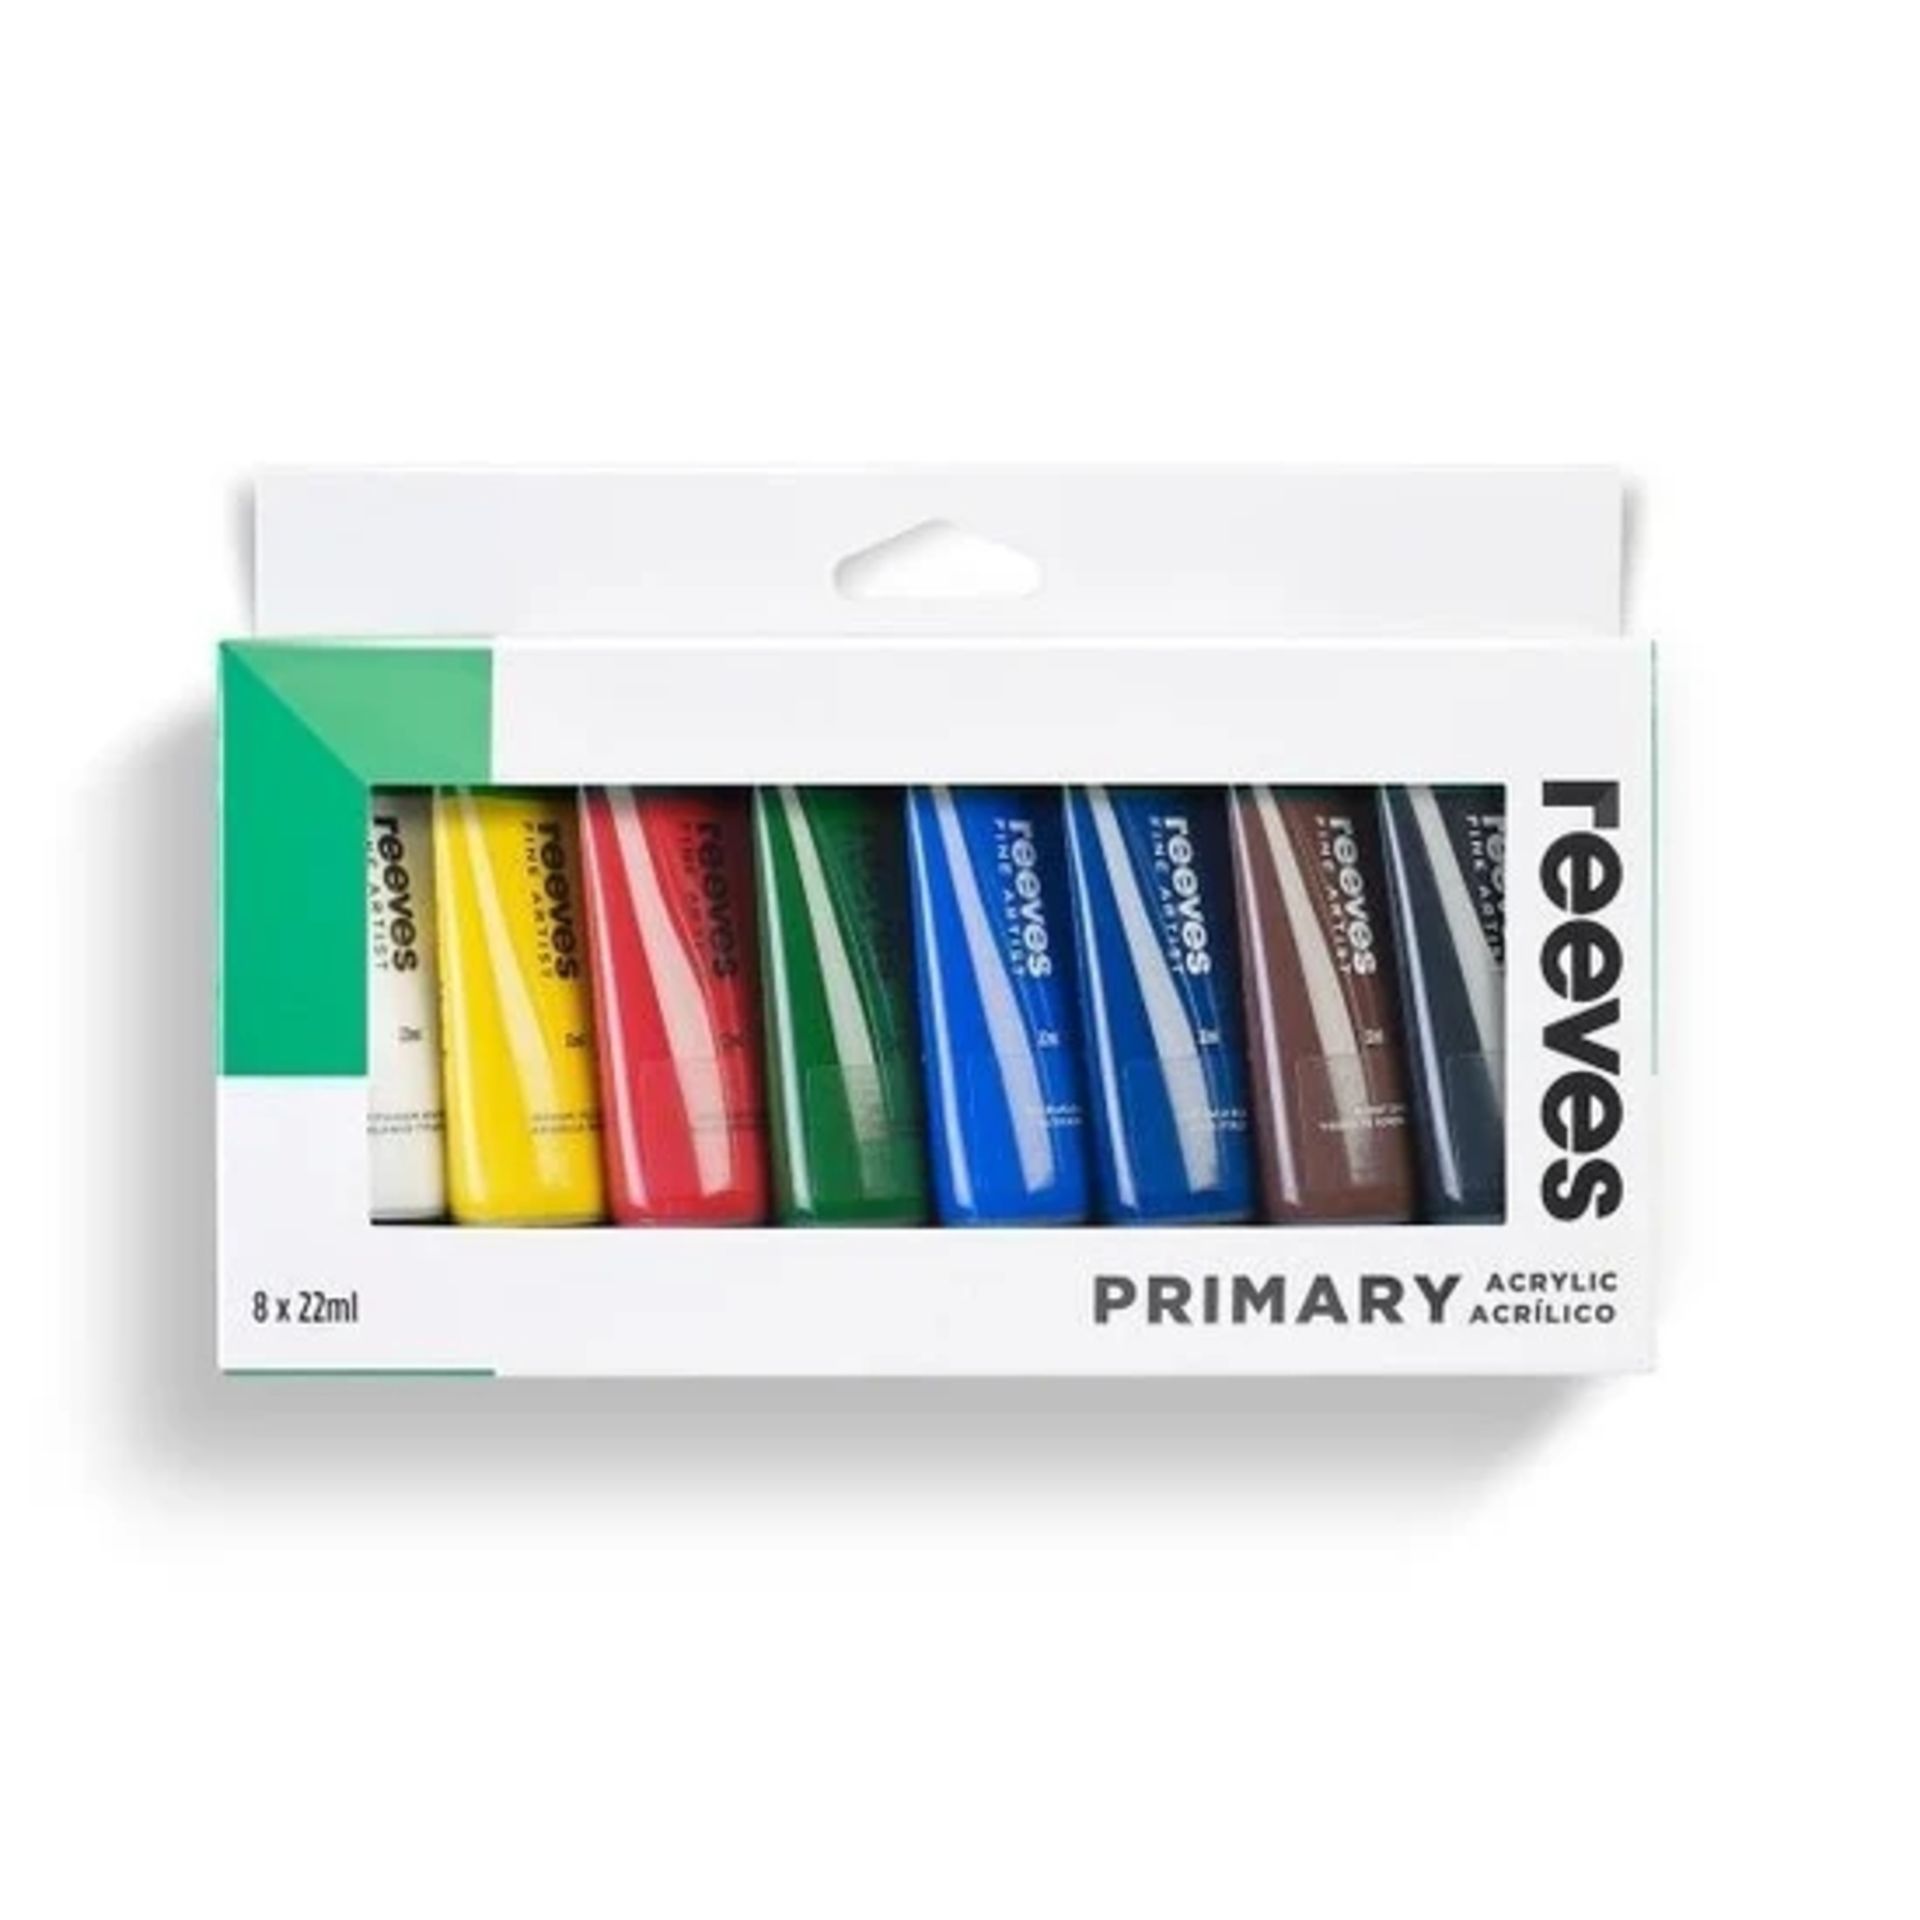 24x BRAND NEW REEVES Acrylic Primary Colour Pain Set - 8 x 22ml. RRP £12.99 EACH. (R12-10). Reeves